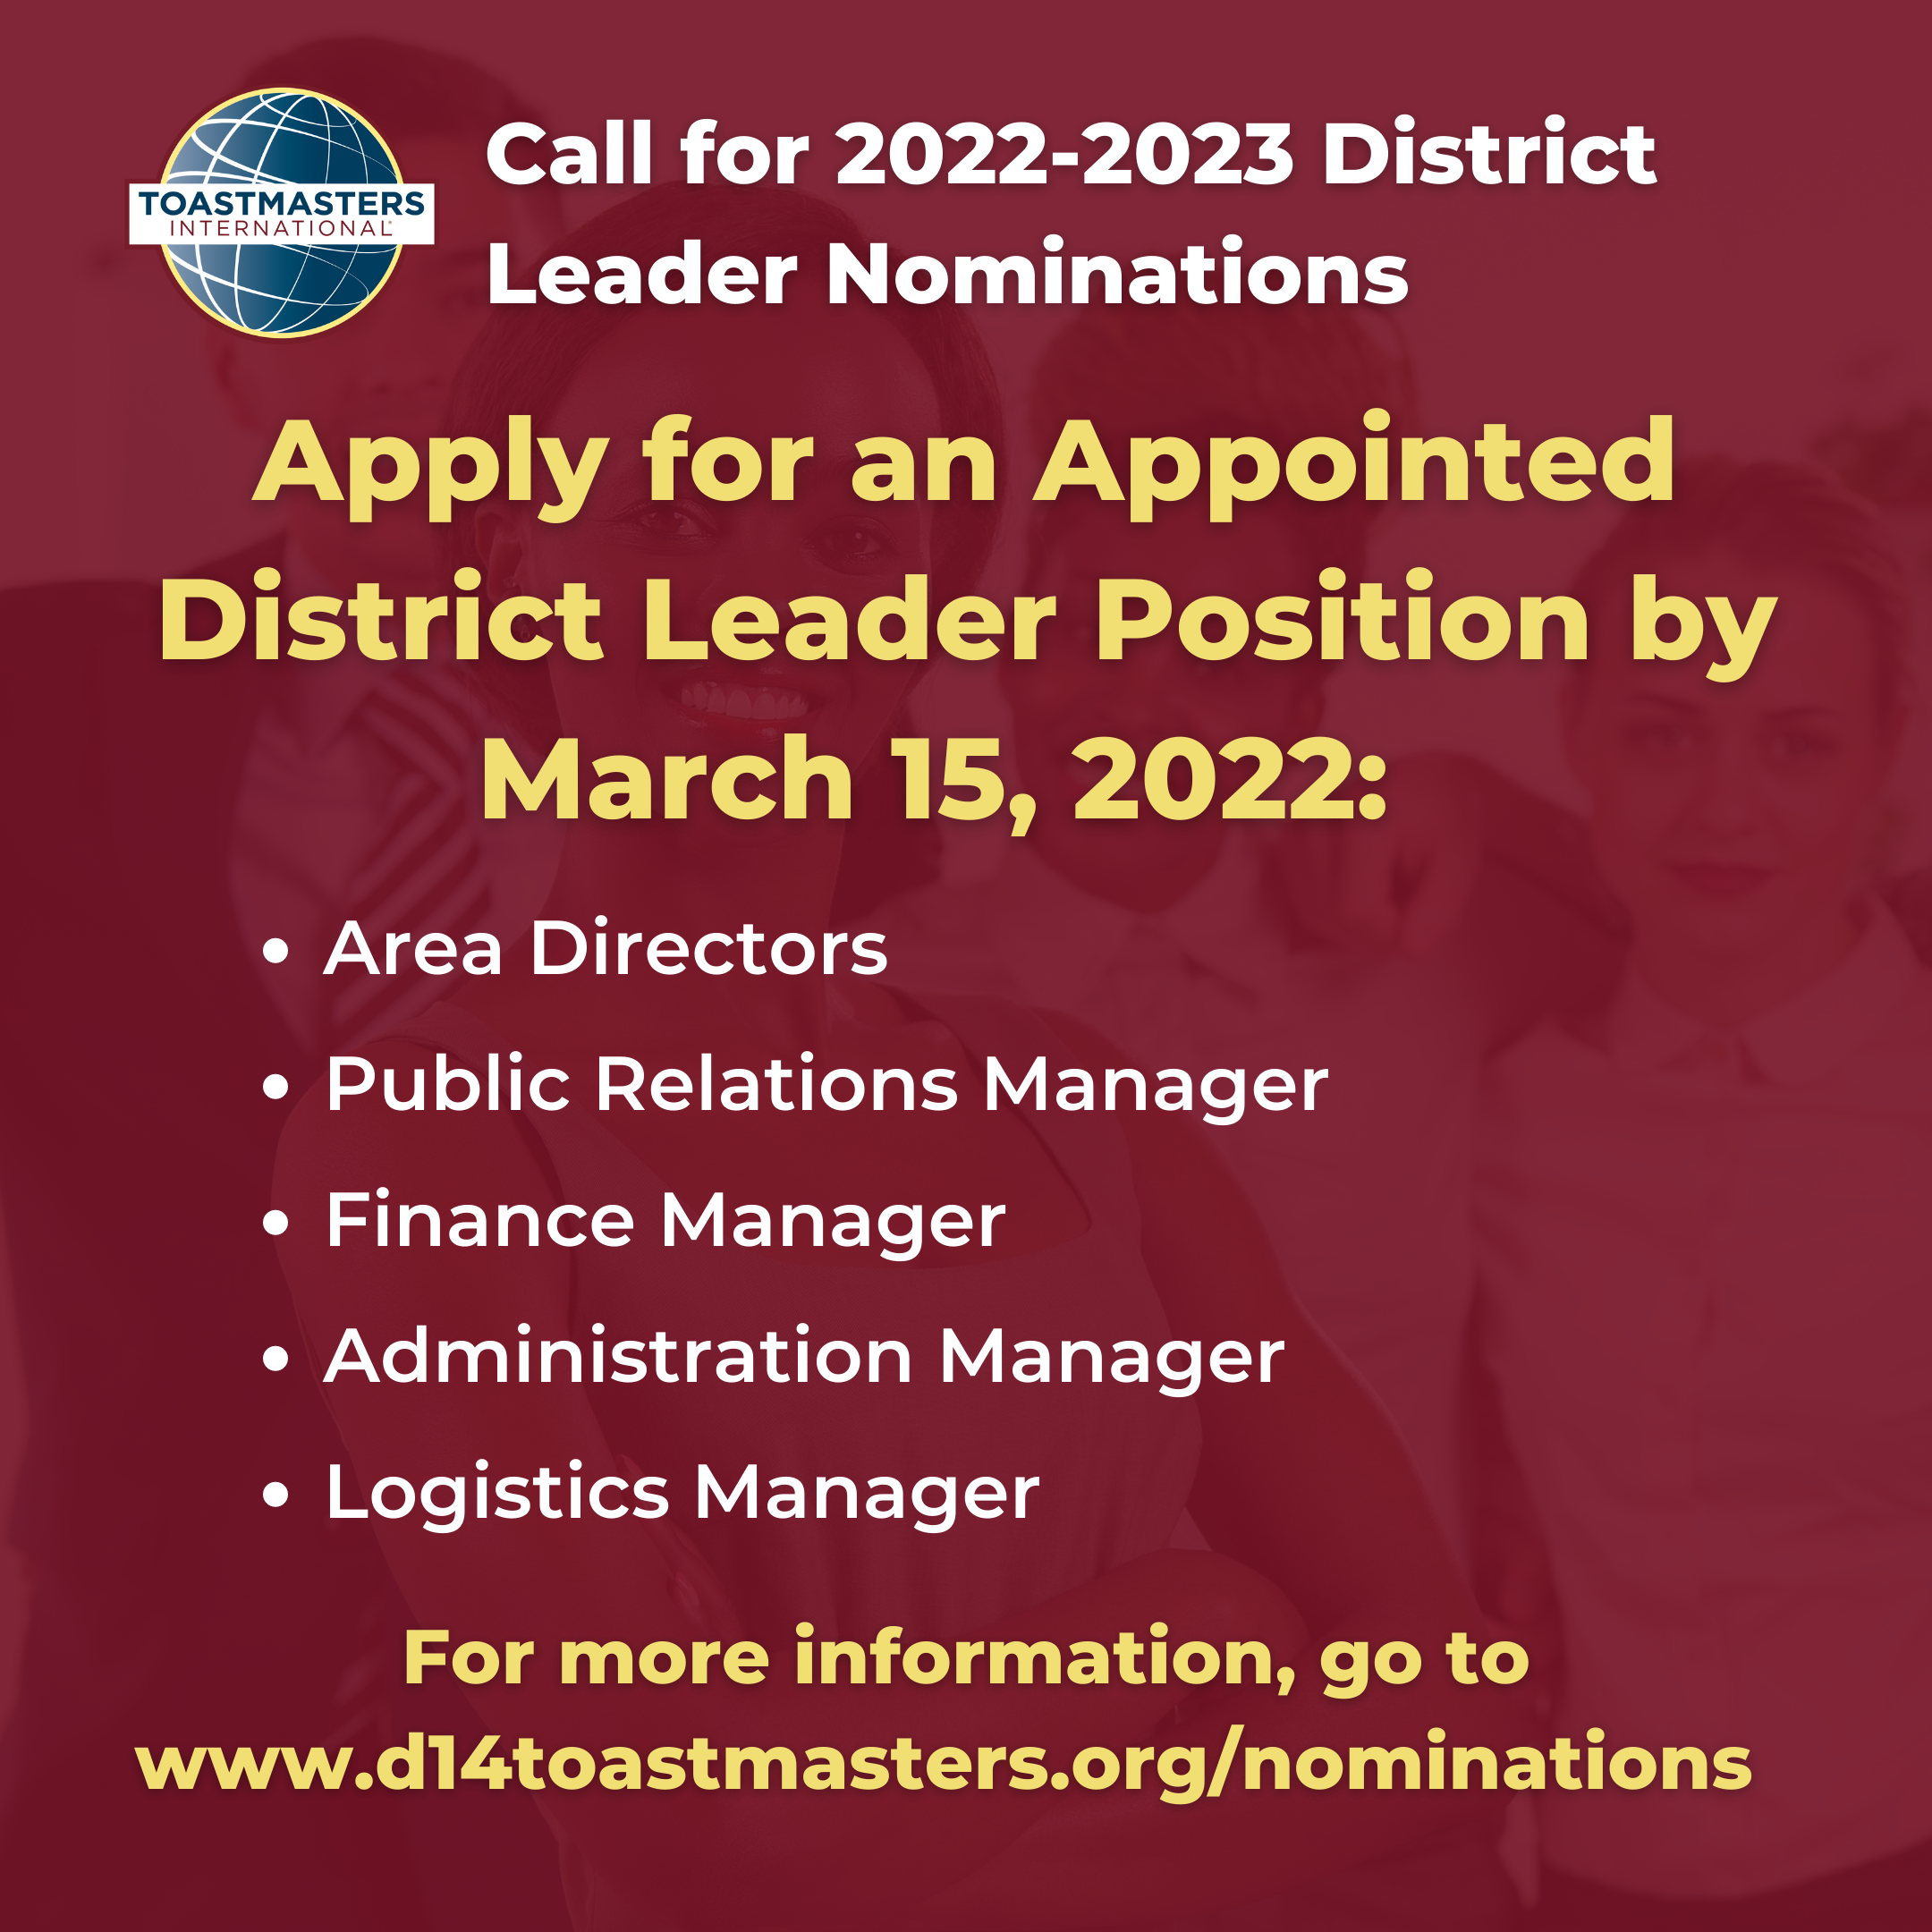 Call for 2022-2023 Appointed District Leader Nominations